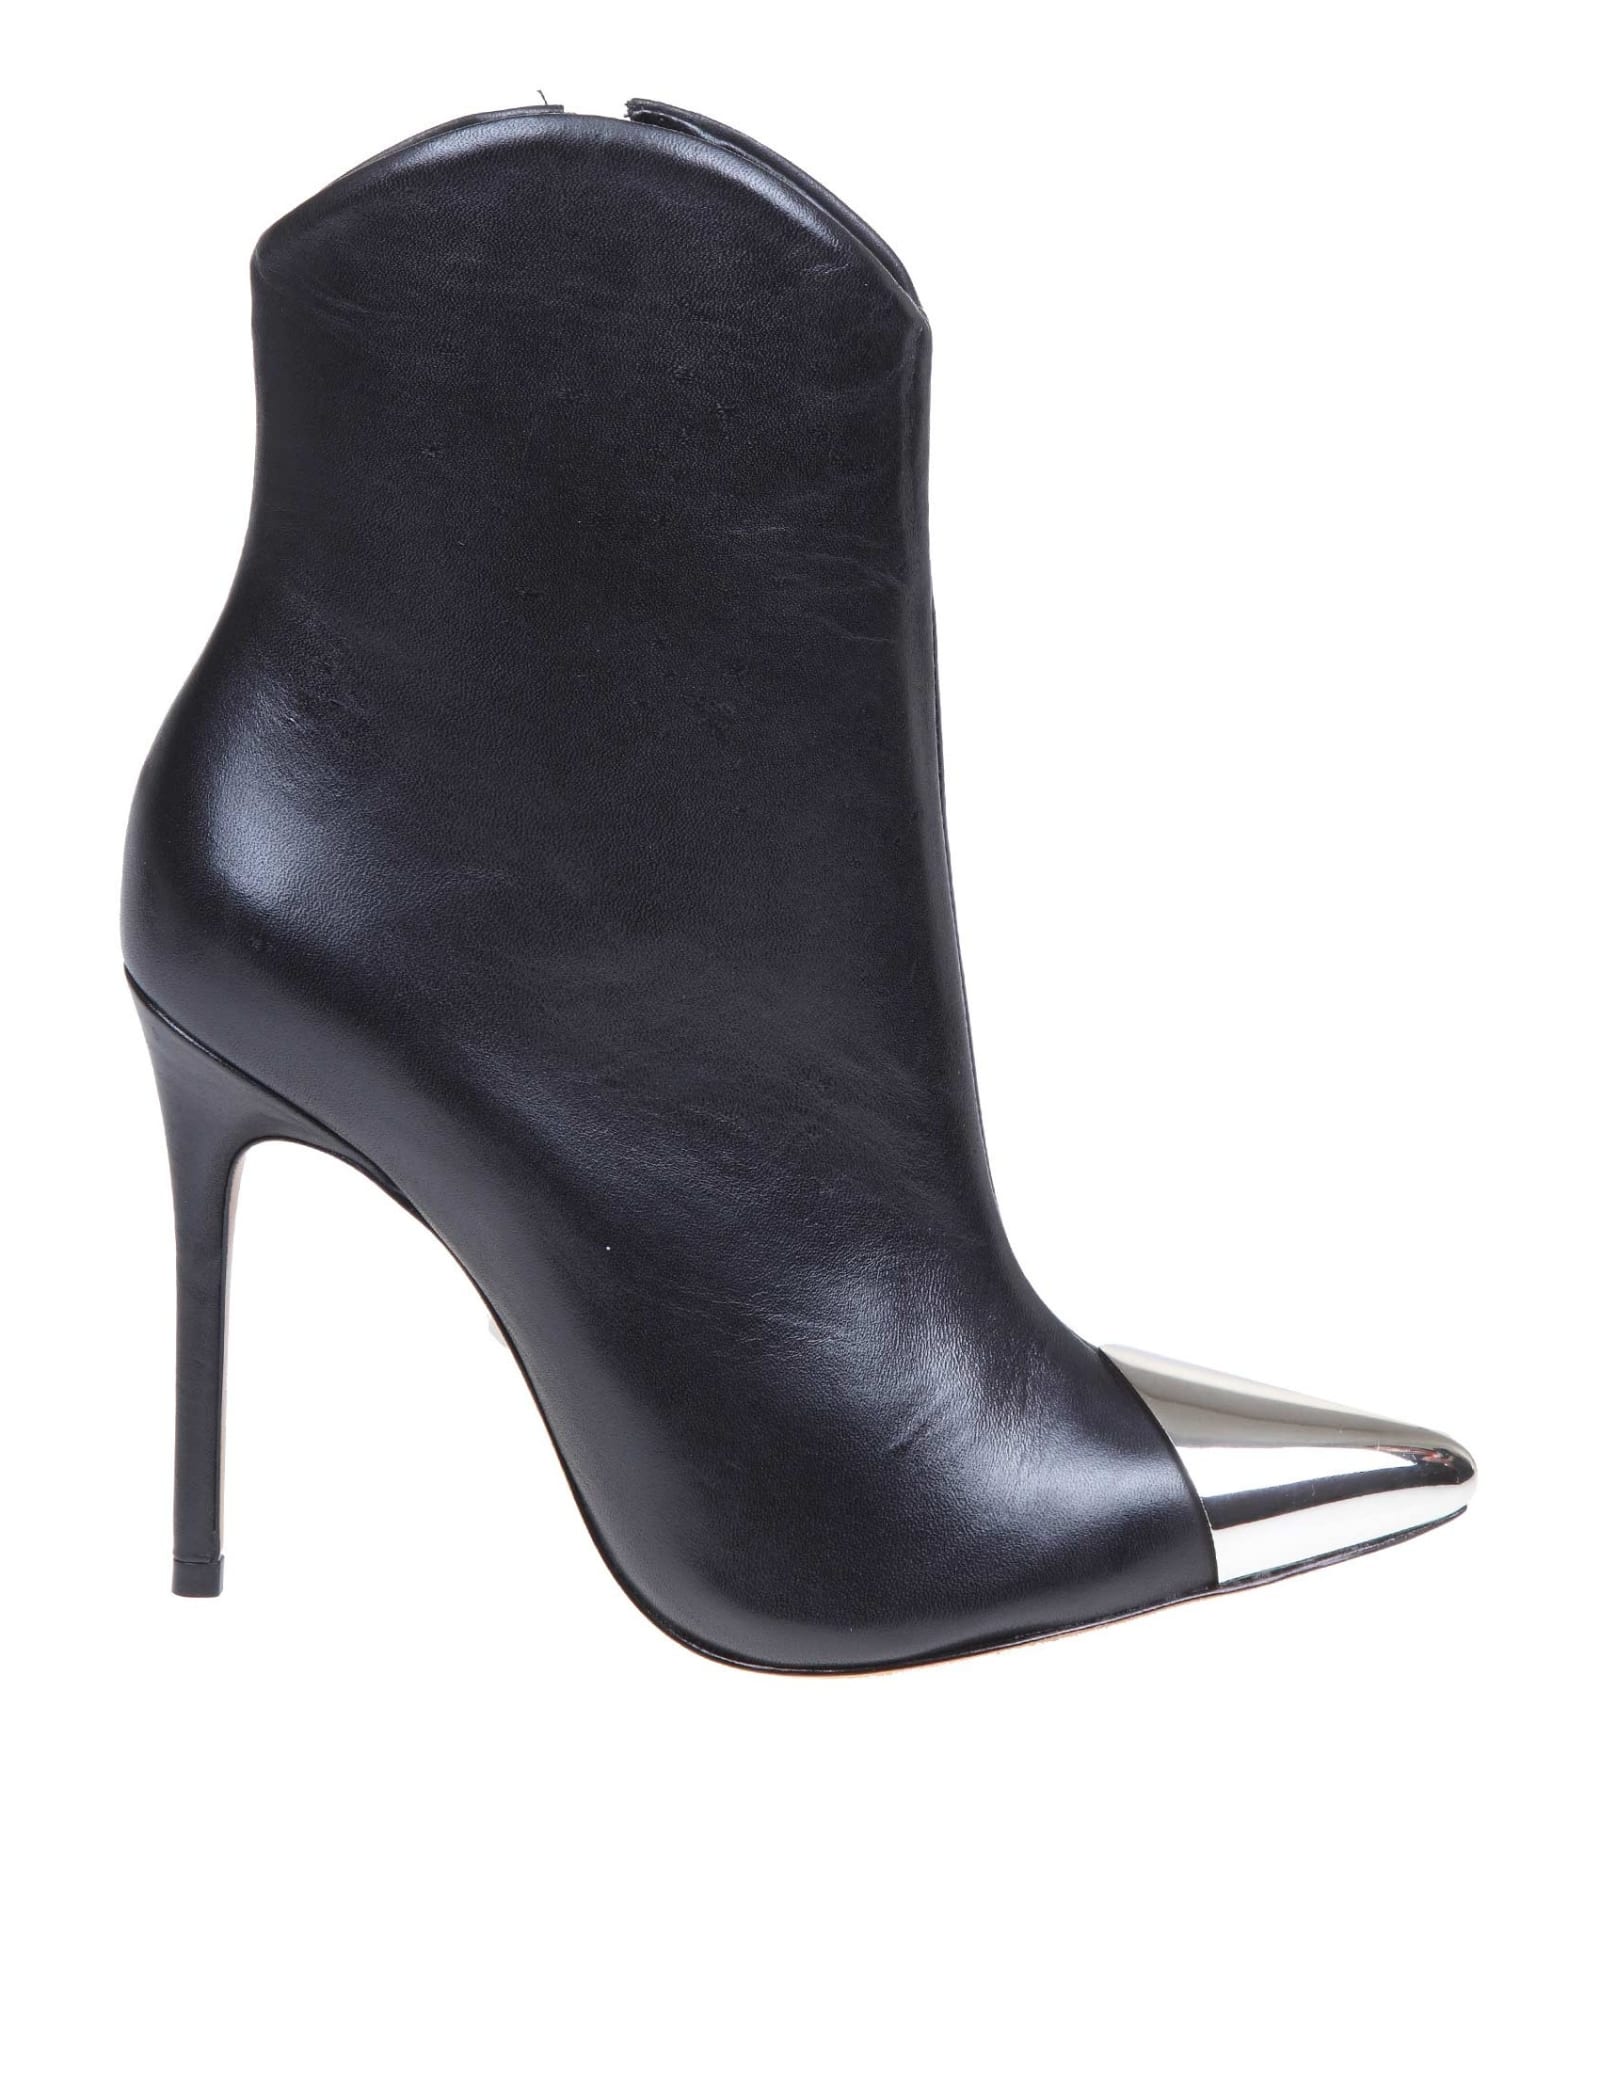 SCHUTZ BLACK LEATHER ANKLE BOOT,11164833